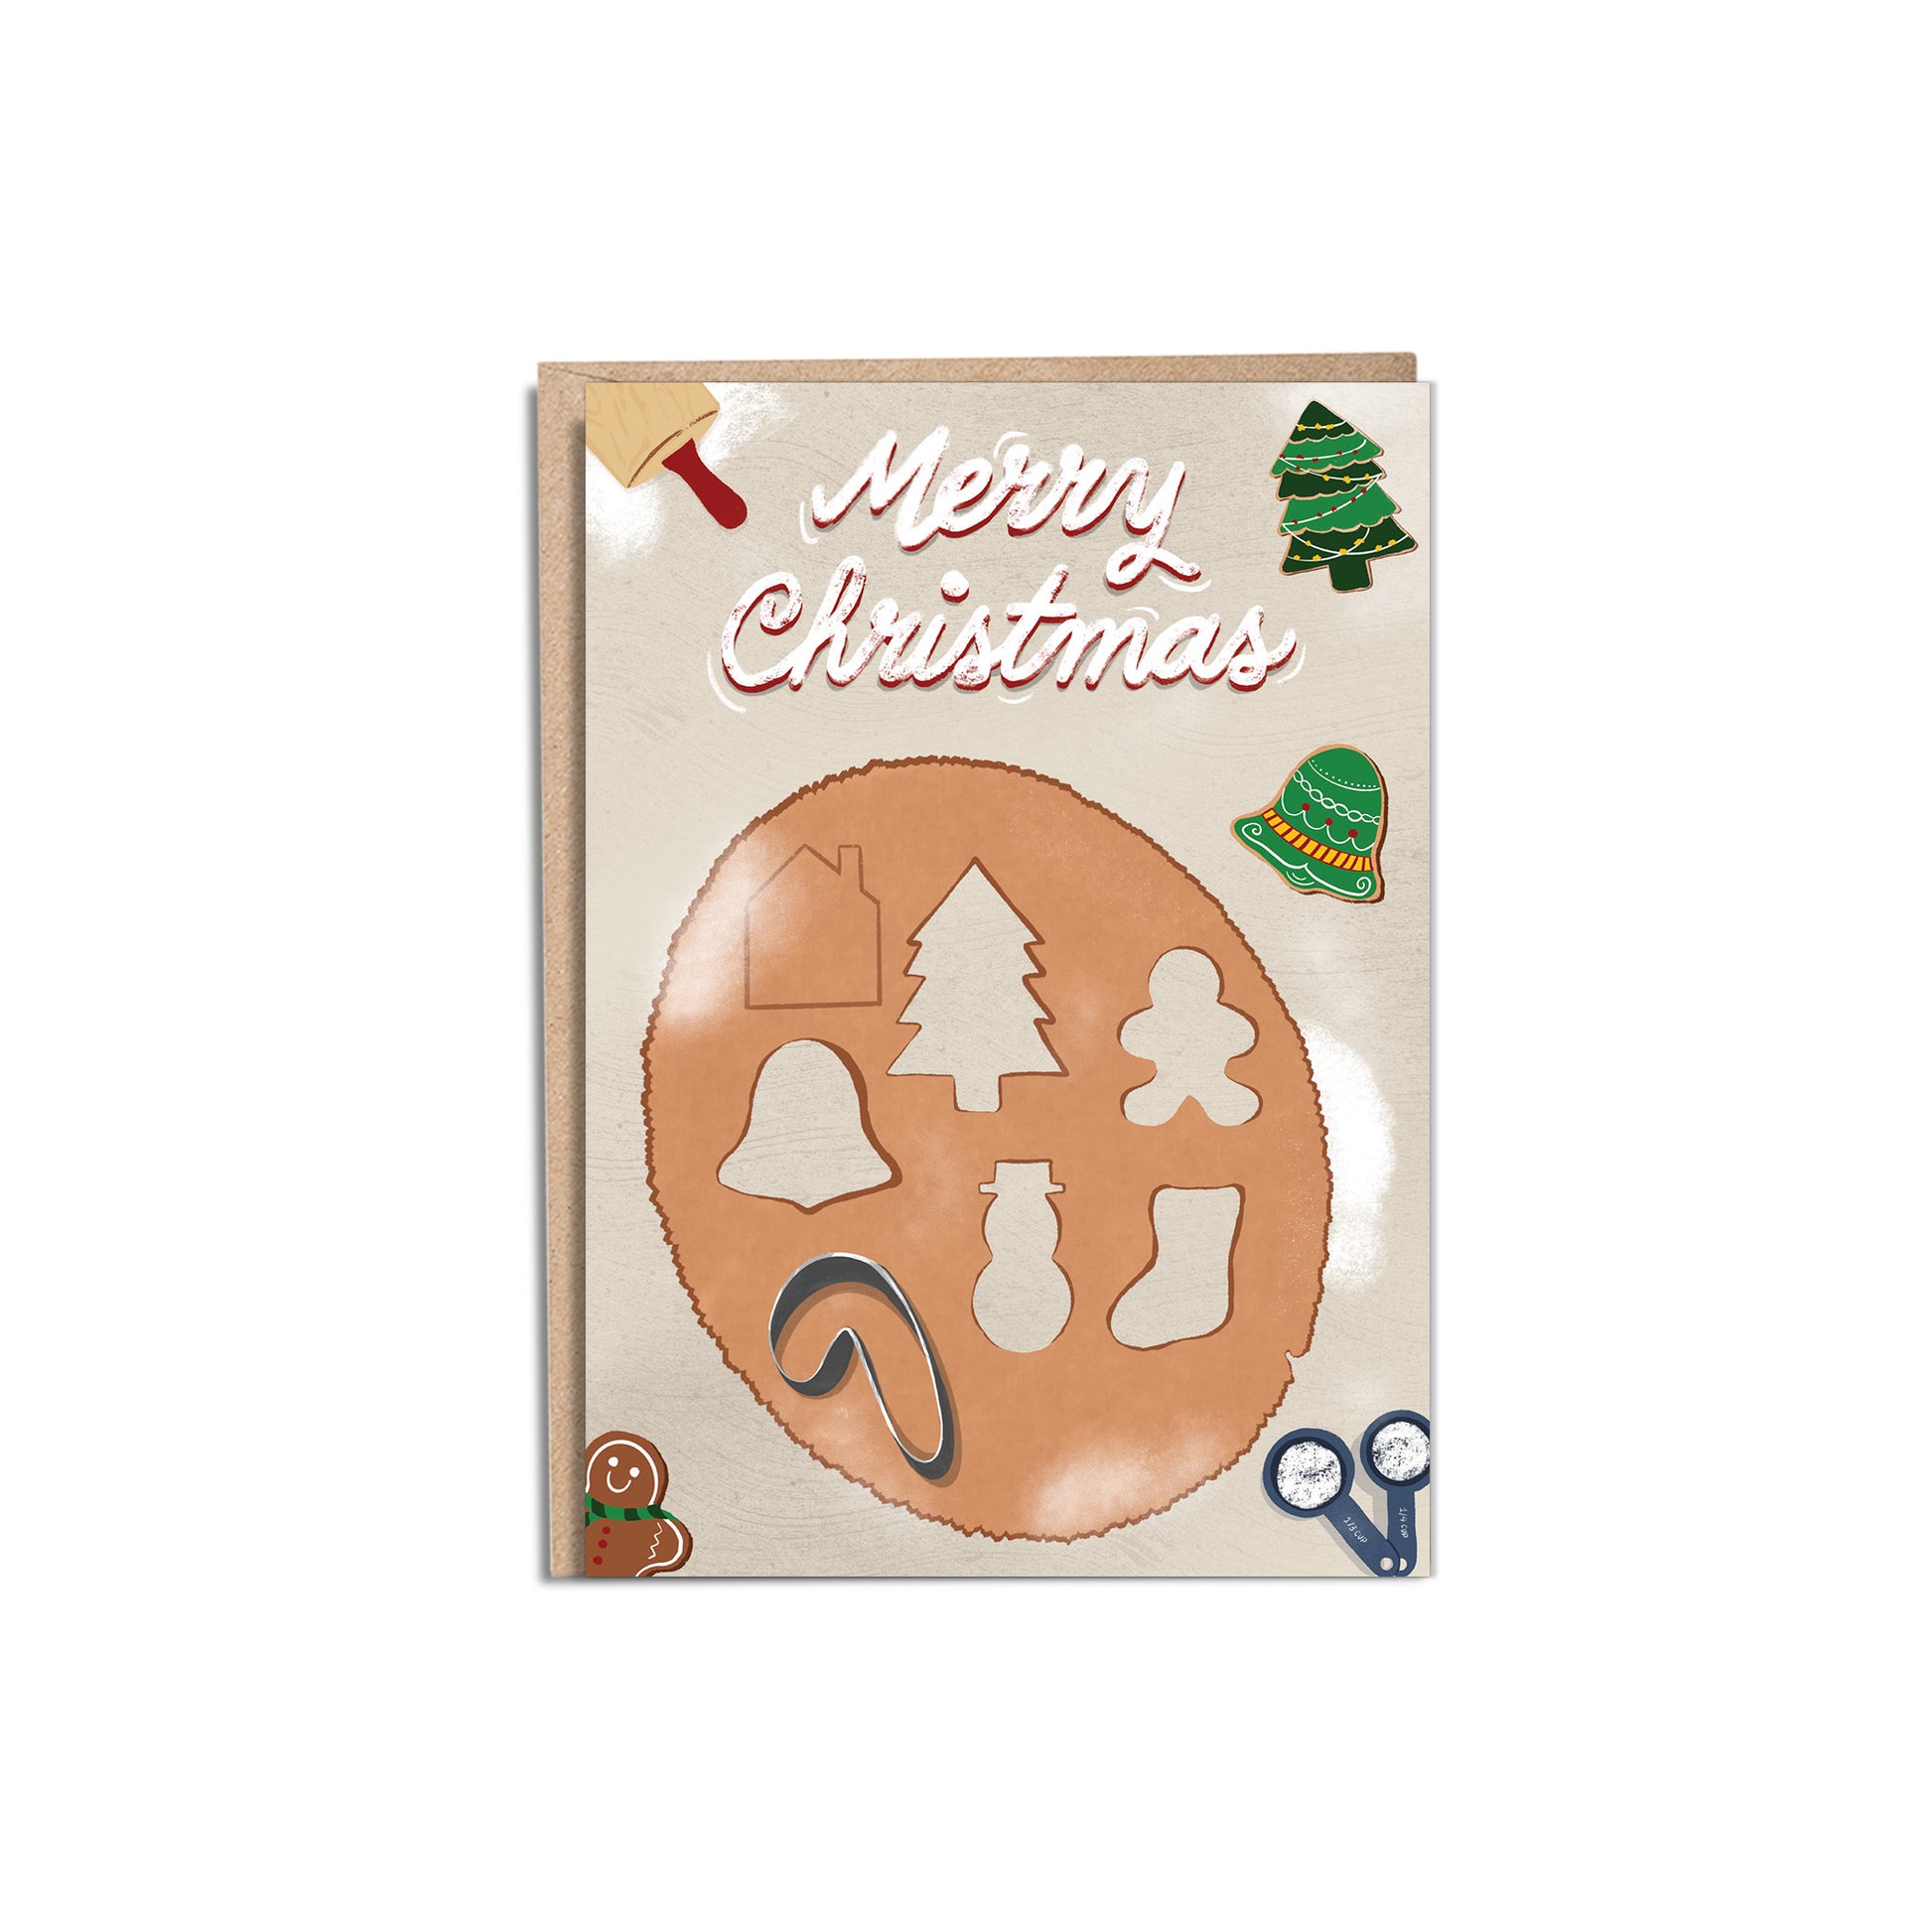 Santa's Baker 5x7” holiday Christmas greeting card from Goods Made By Digitrillnana, Ashley Fletcher. Black Woman Owned. Cookie cutter, baking, Christmas card. Perfect card for your Christmas gift!